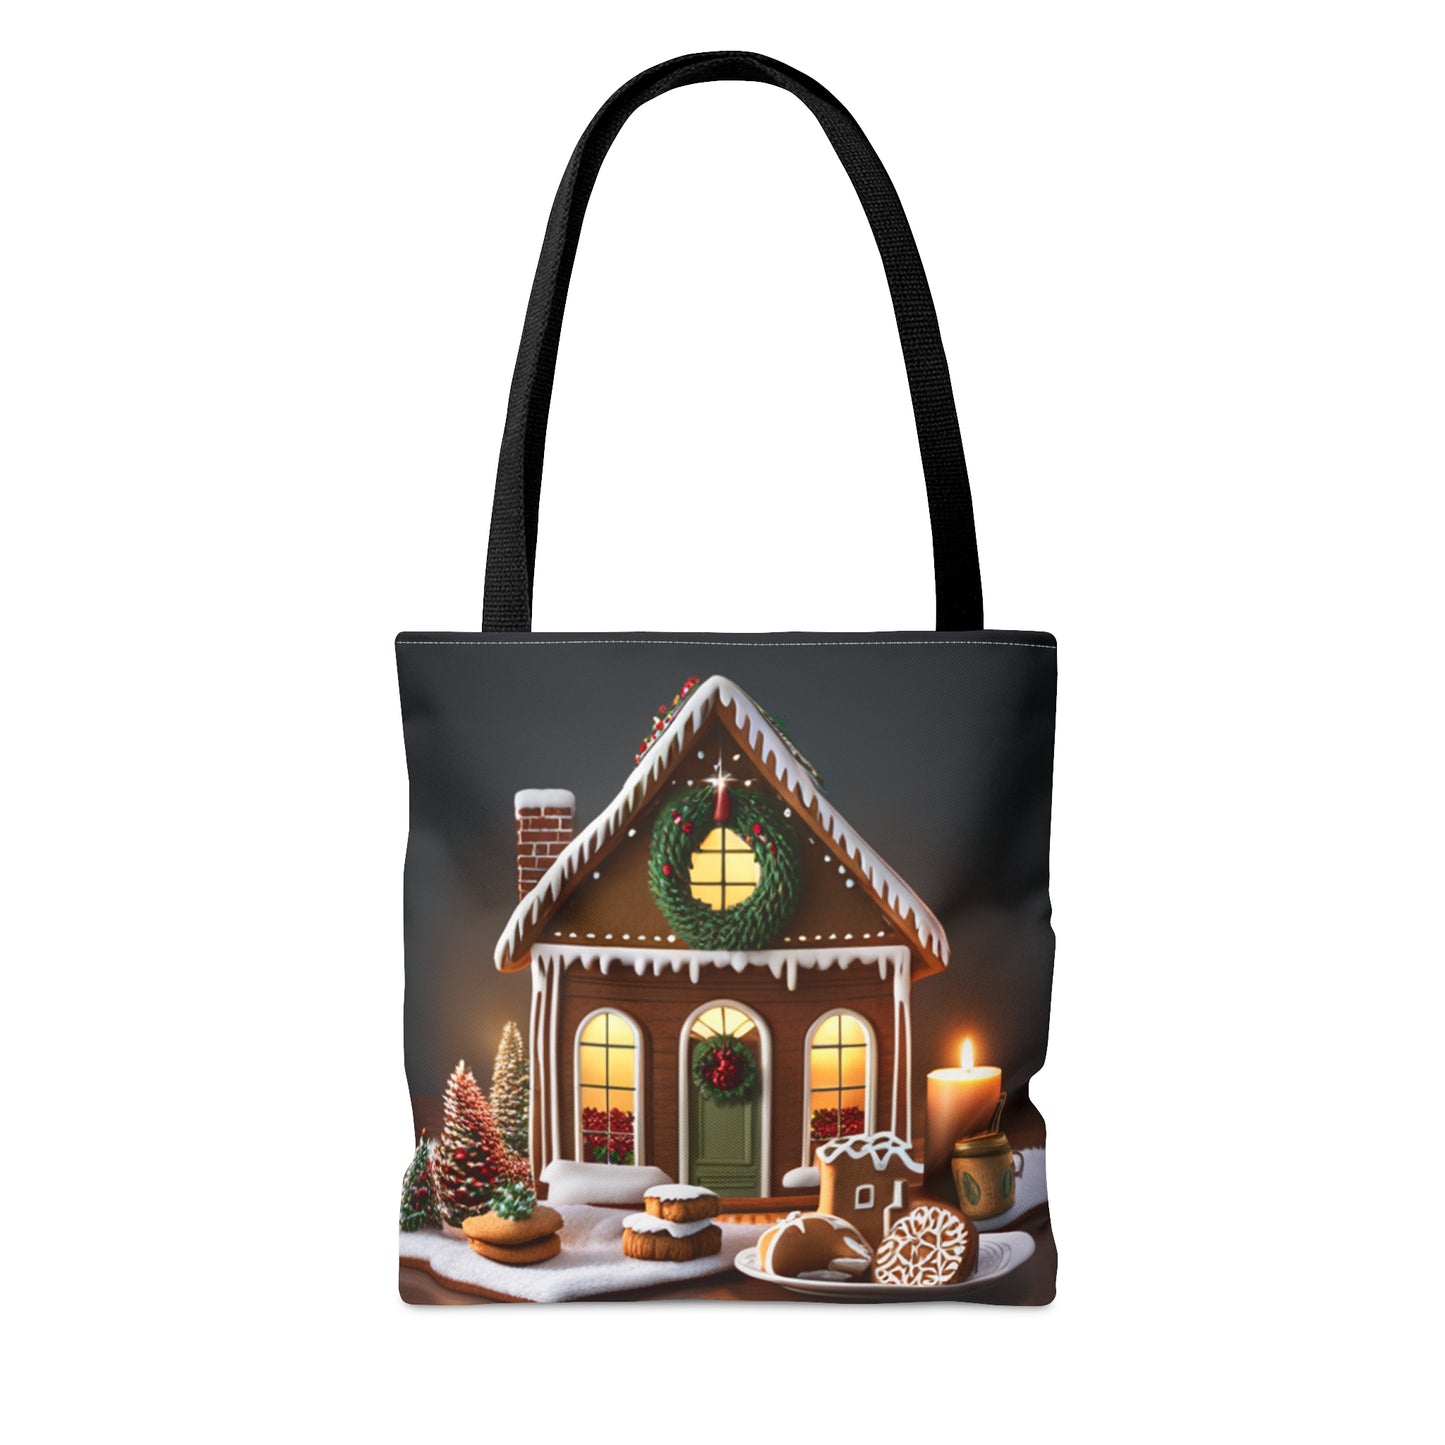 Gingerbread House Tote Bag